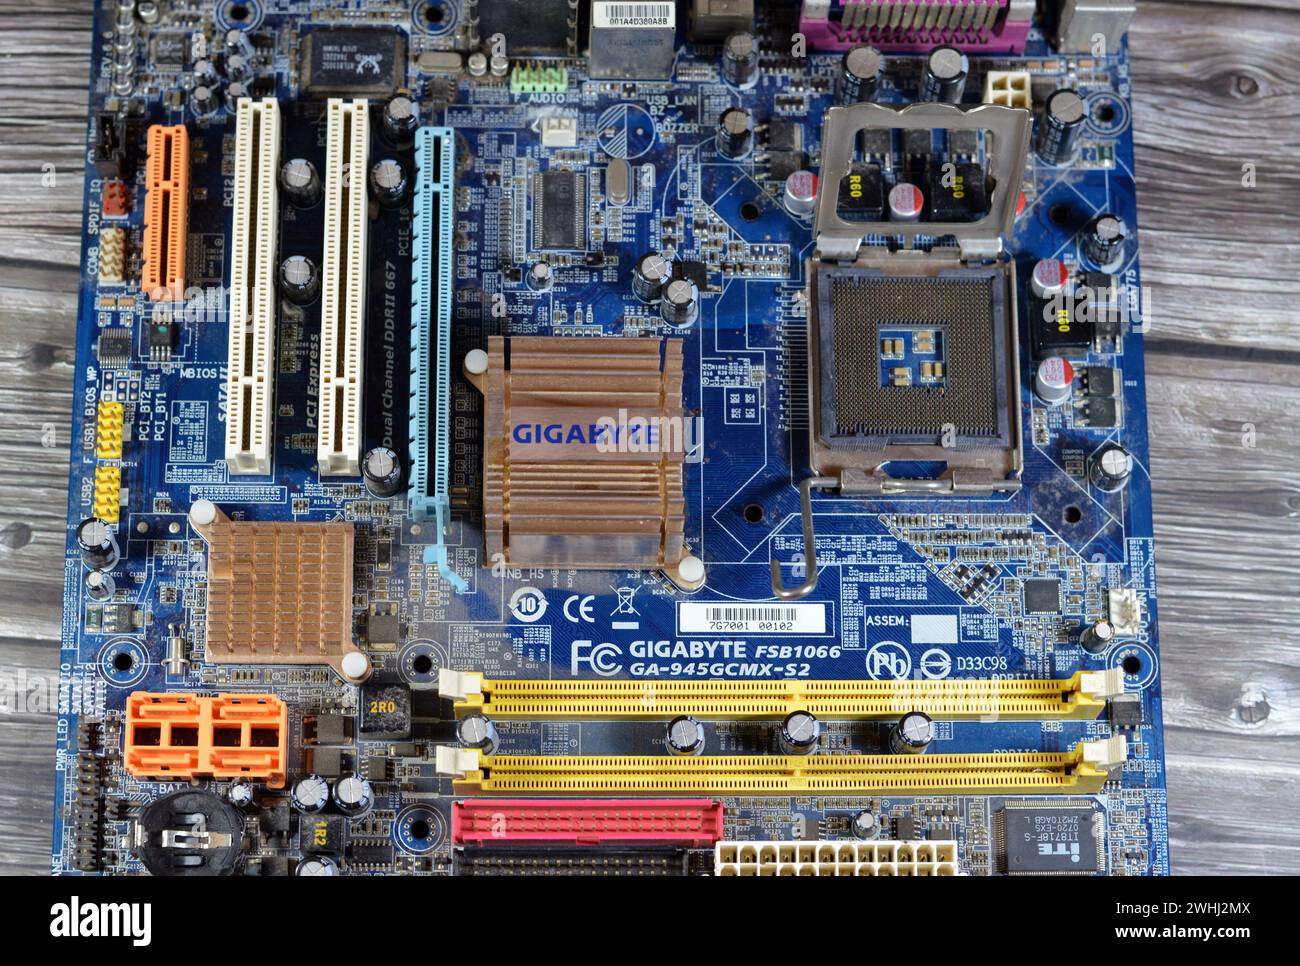 Cairo, Egypt, February 9 2024: Gigabyte main board computer motherboard FSB 1066 supports Core 2 Duo processor, Gigabyte is a Taiwanese manufacturer a Stock Photo